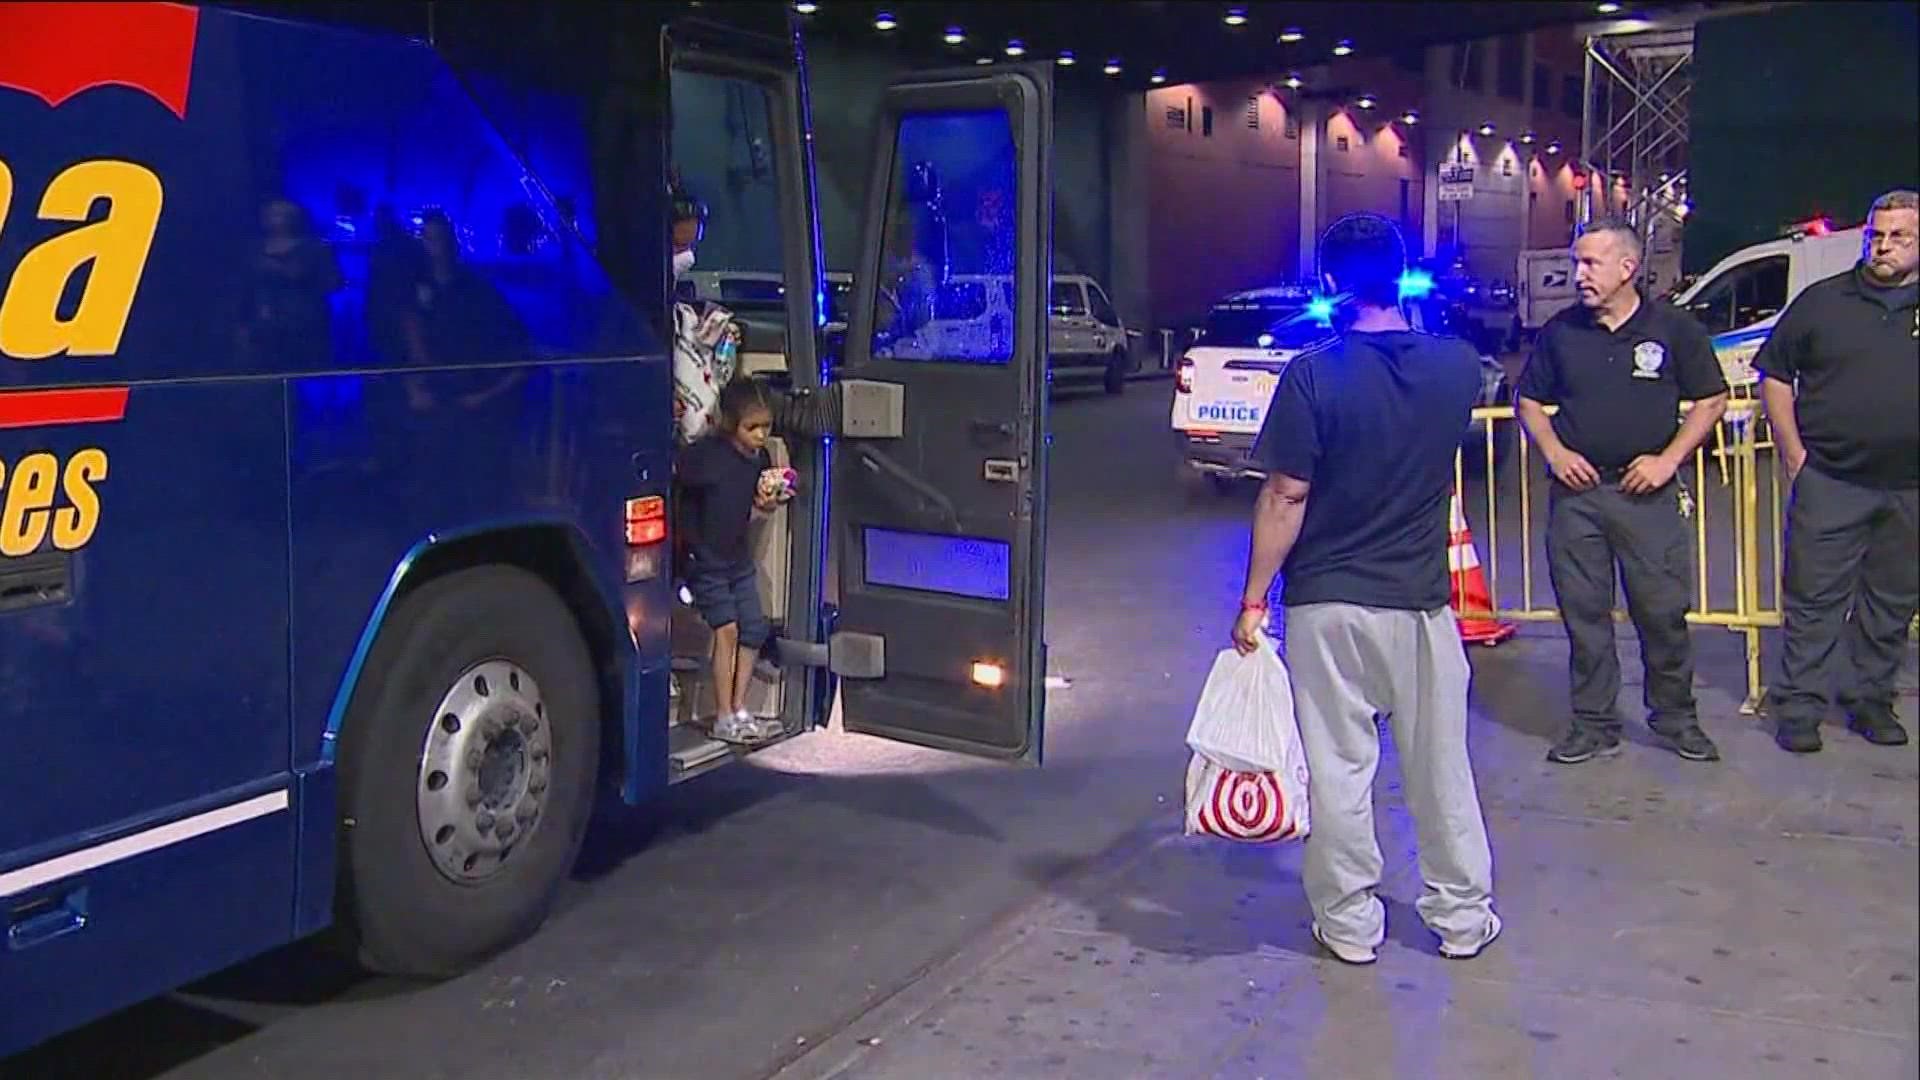 Gov. Greg Abbott announced Tuesday that a group of migrants was bused to Philadelphia. They are set to arrive at a transit station on Wednesday.